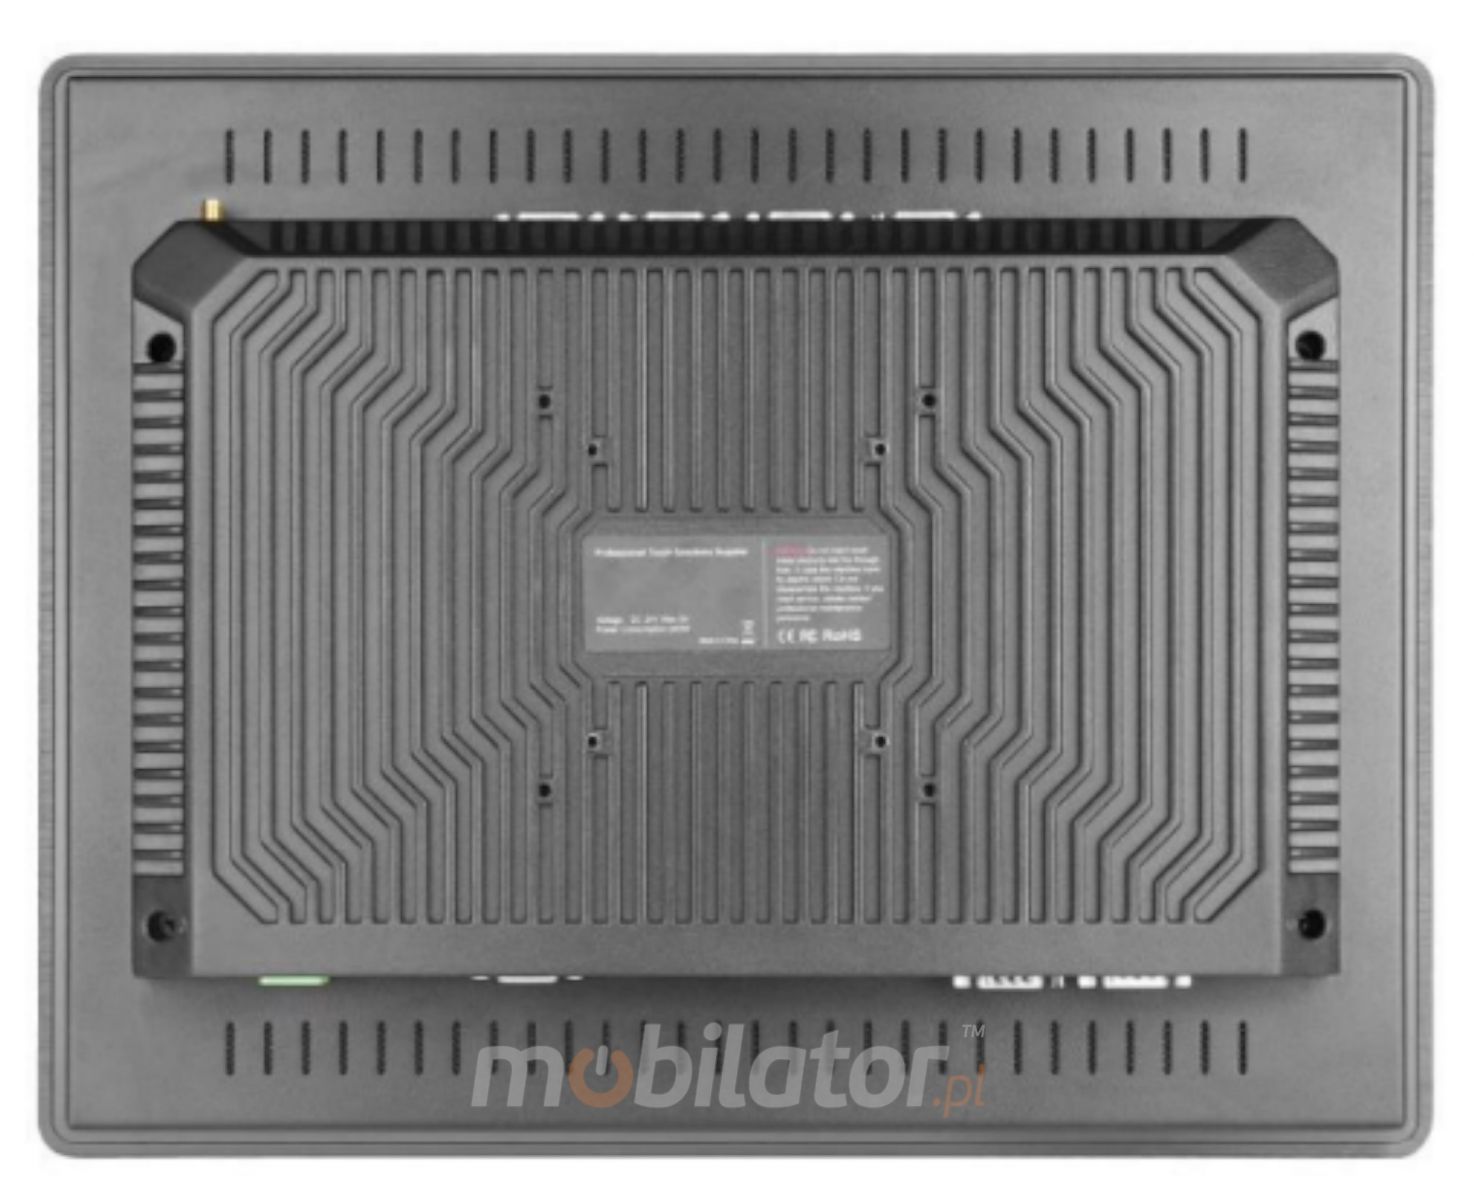 durable and high-quality housing in the BiBOX-156PC2